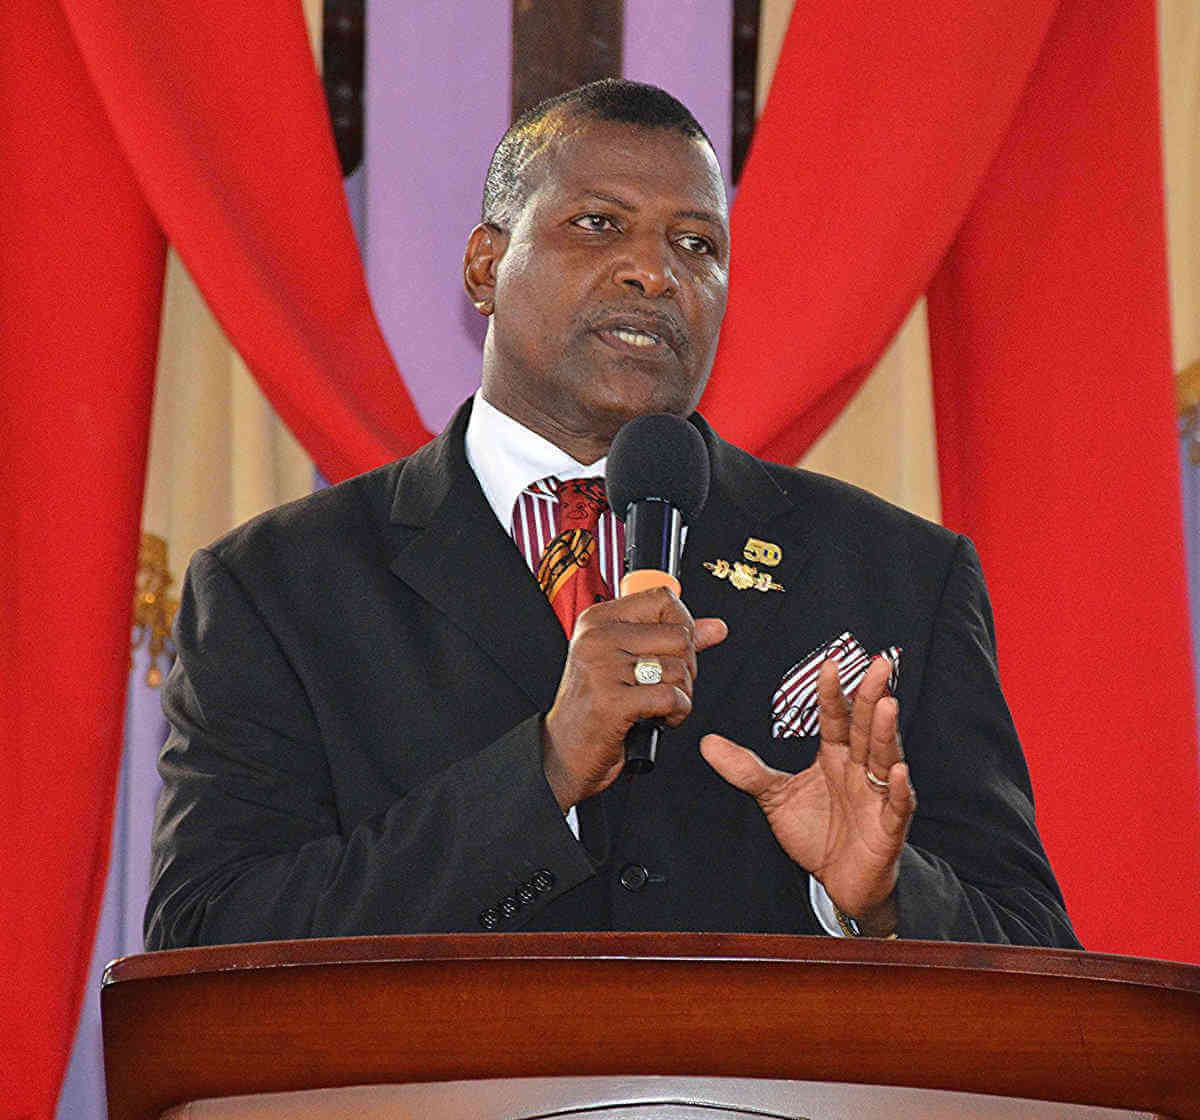 Vanquished pols are silent in Barbados|Vanquished pols are silent in Barbados